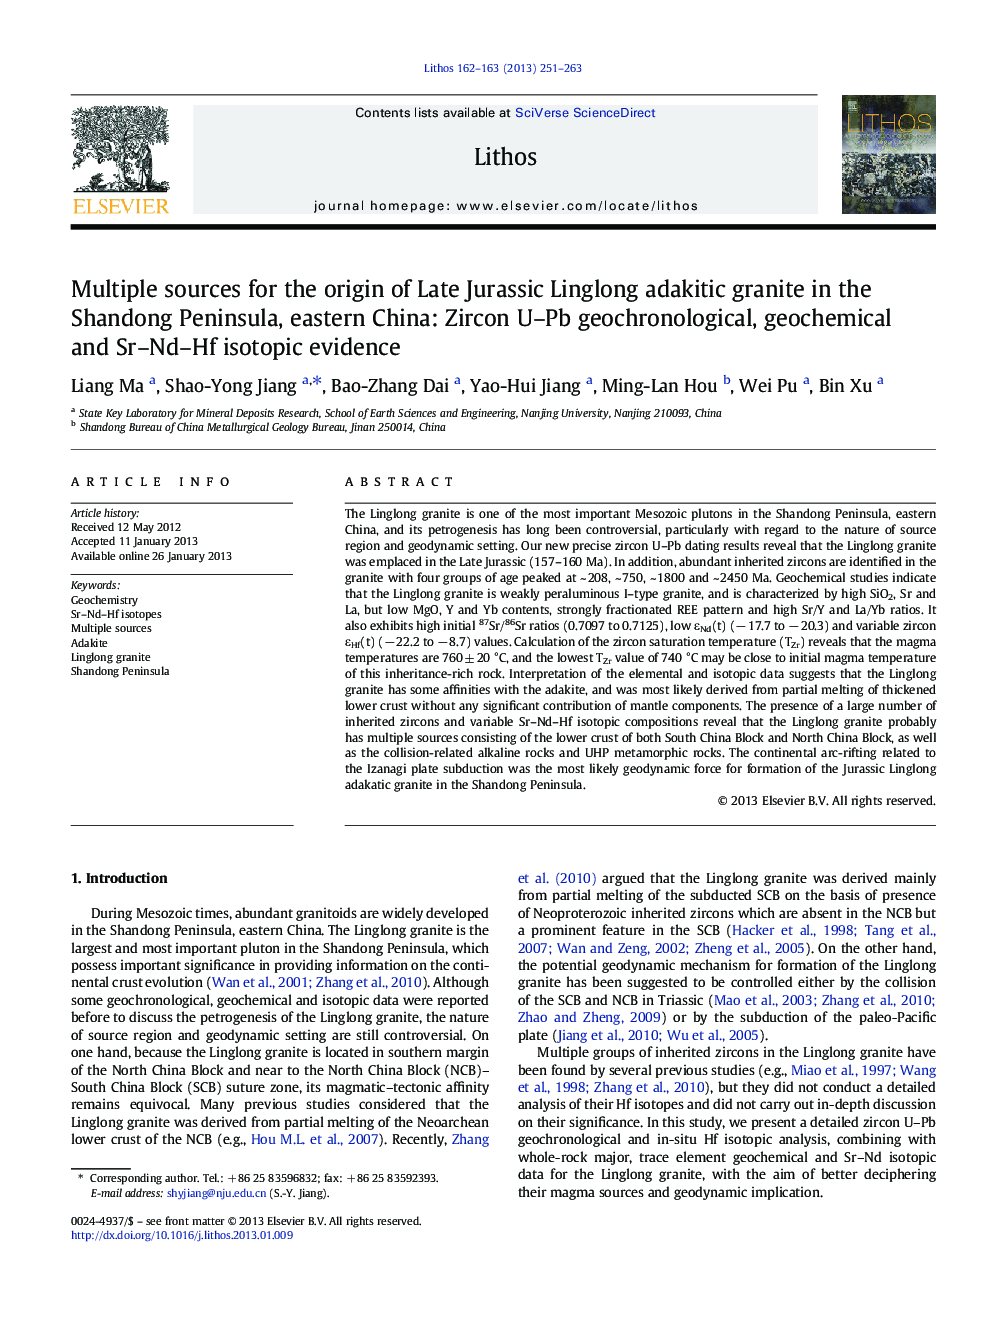 Multiple sources for the origin of Late Jurassic Linglong adakitic granite in the Shandong Peninsula, eastern China: Zircon U–Pb geochronological, geochemical and Sr–Nd–Hf isotopic evidence